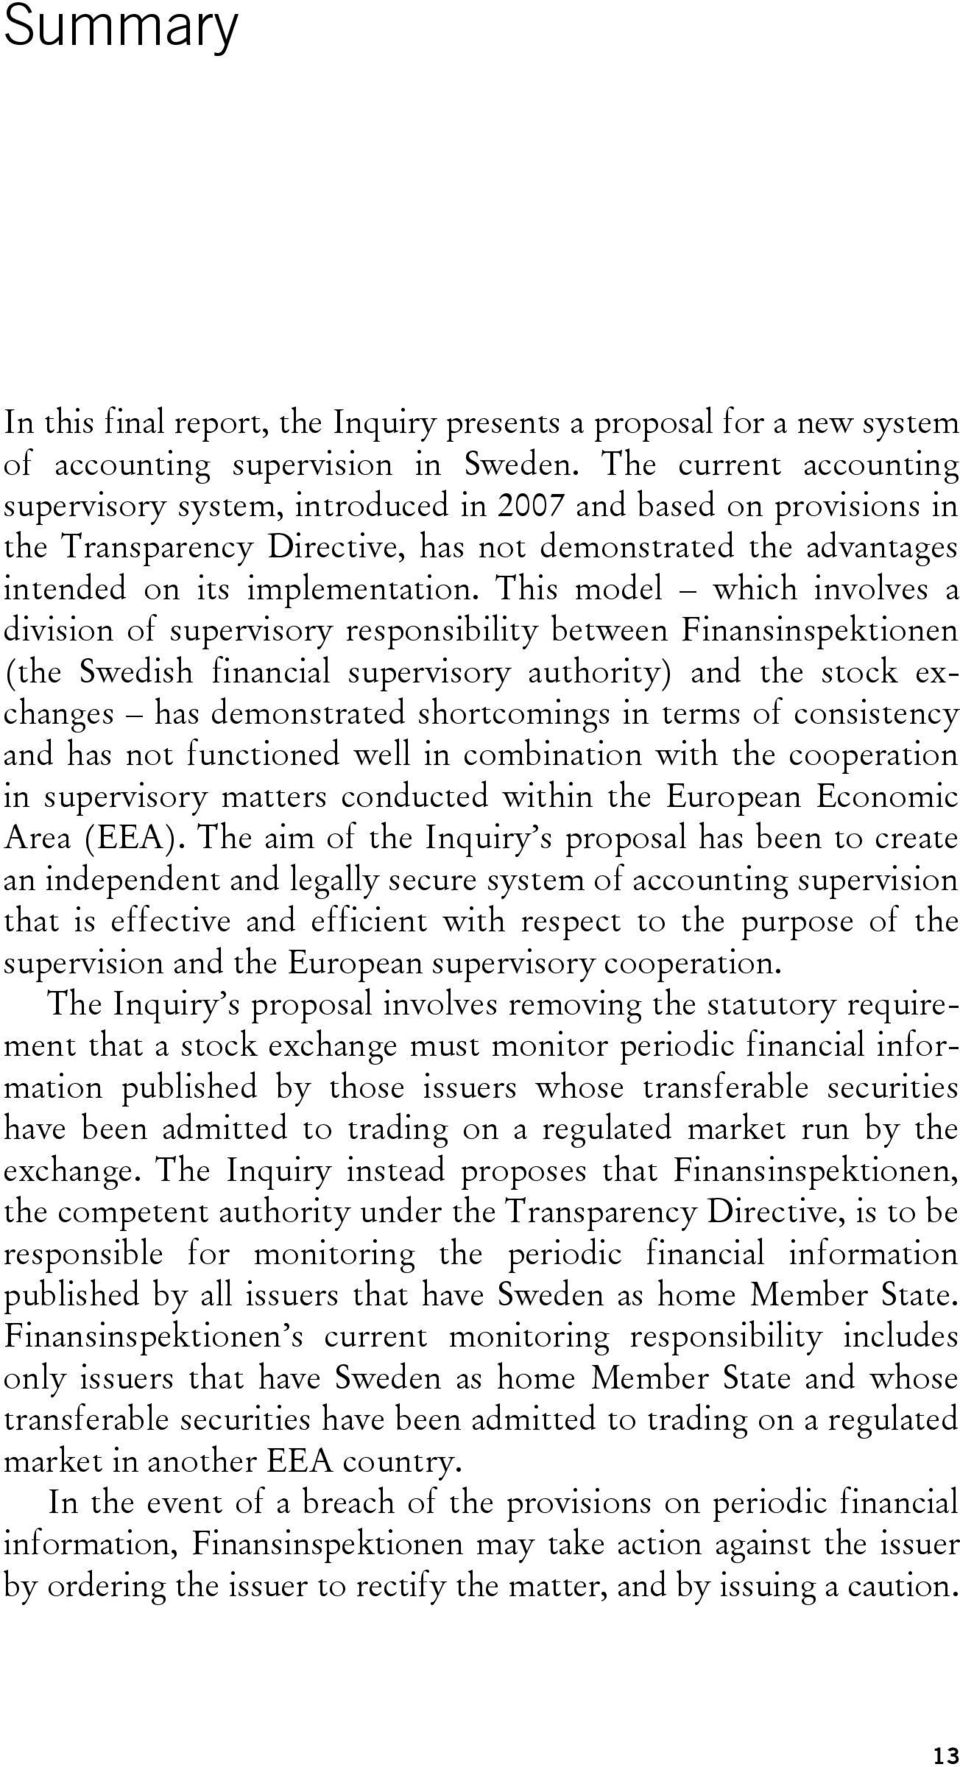 This model which involves a division of supervisory responsibility between Finansinspektionen (the Swedish financial supervisory authority) and the stock exchanges has demonstrated shortcomings in